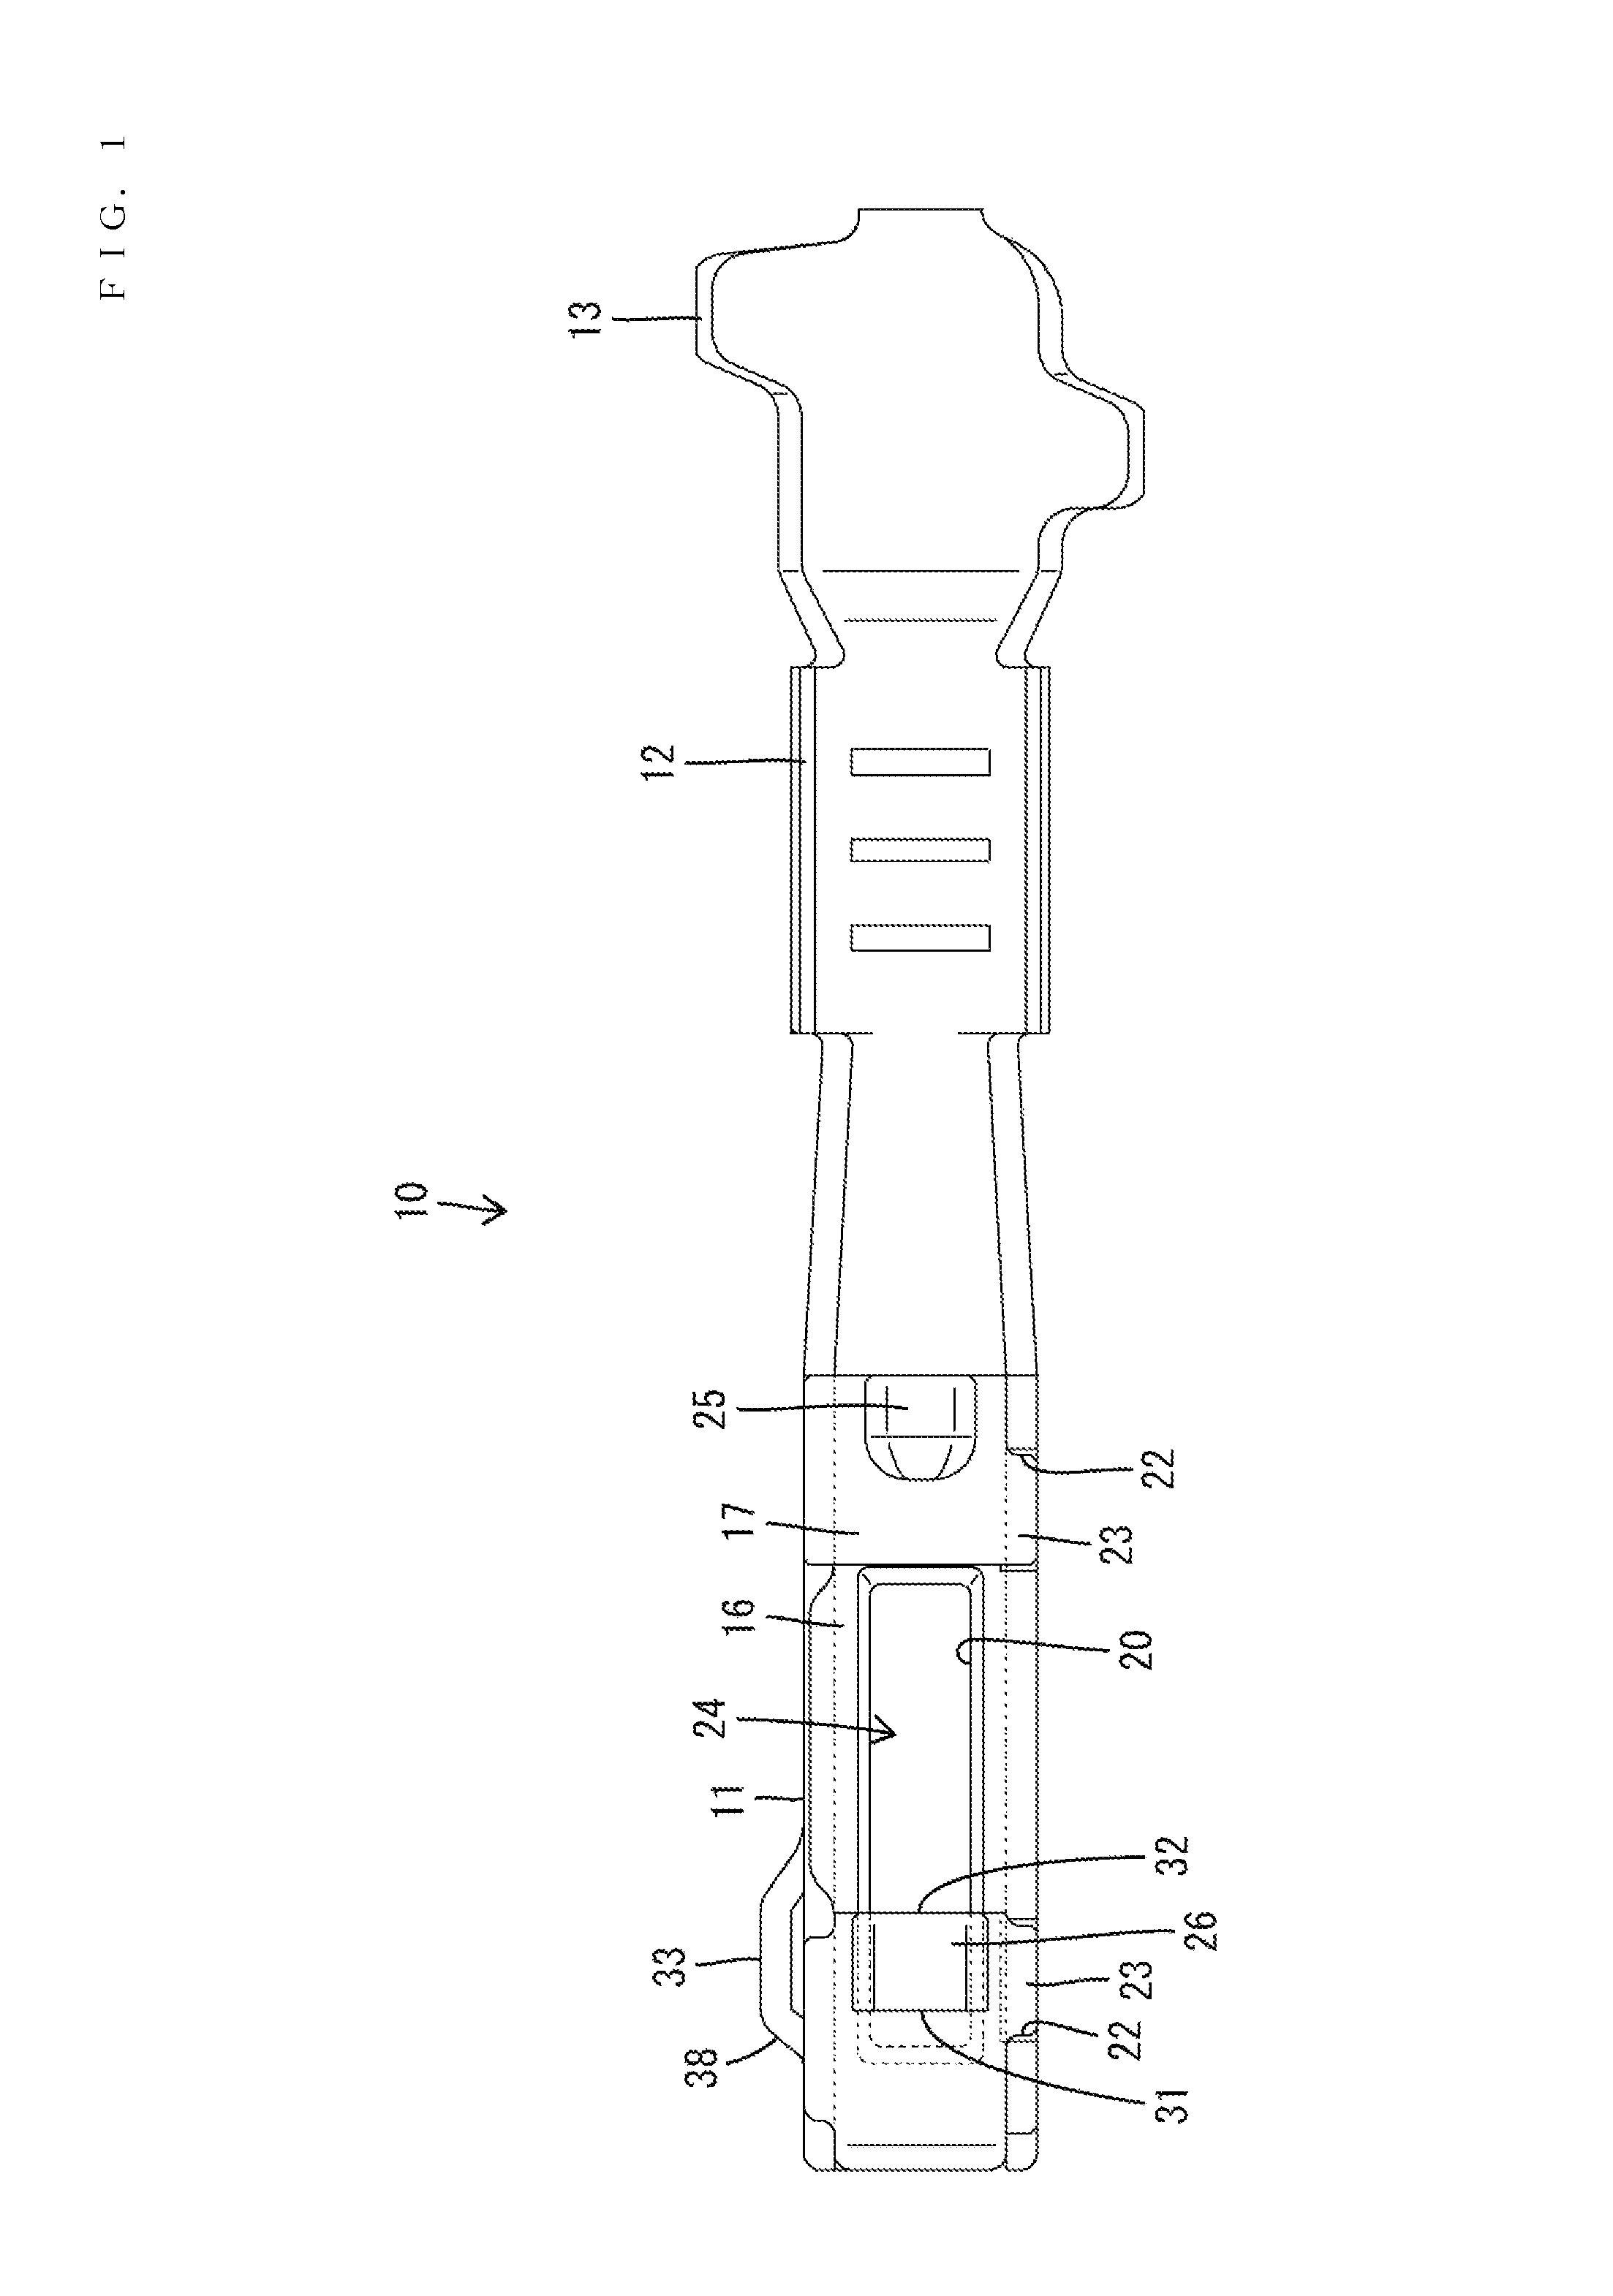 Terminal fitting with stabilizers and connector